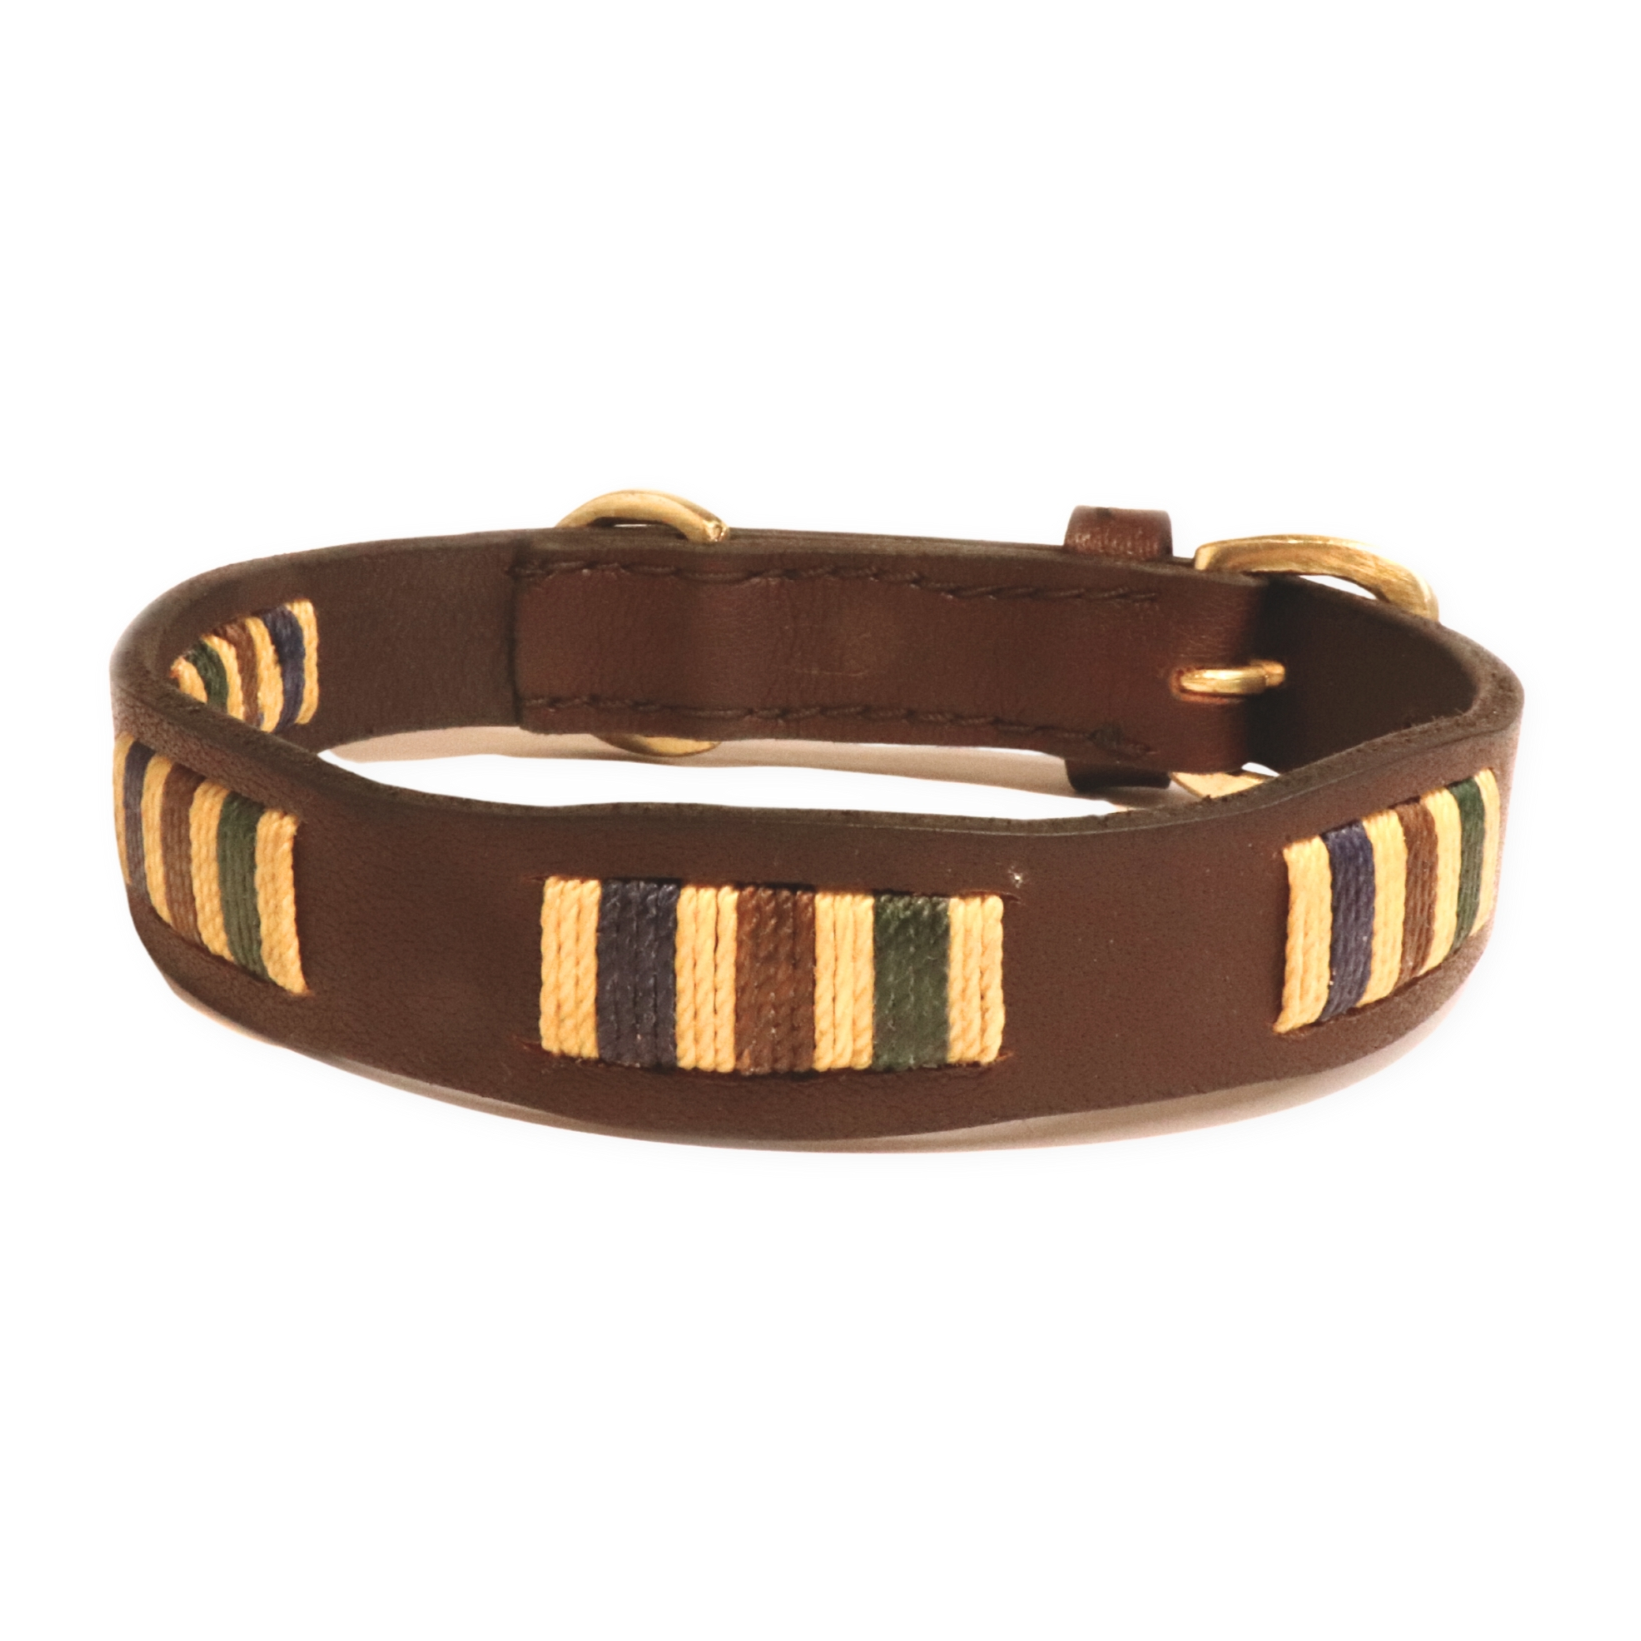 A handmade Polo Collar - Jinky with a golden buckle and striped, earth-toned embellishments, isolated on a white background by Georgie Paws.